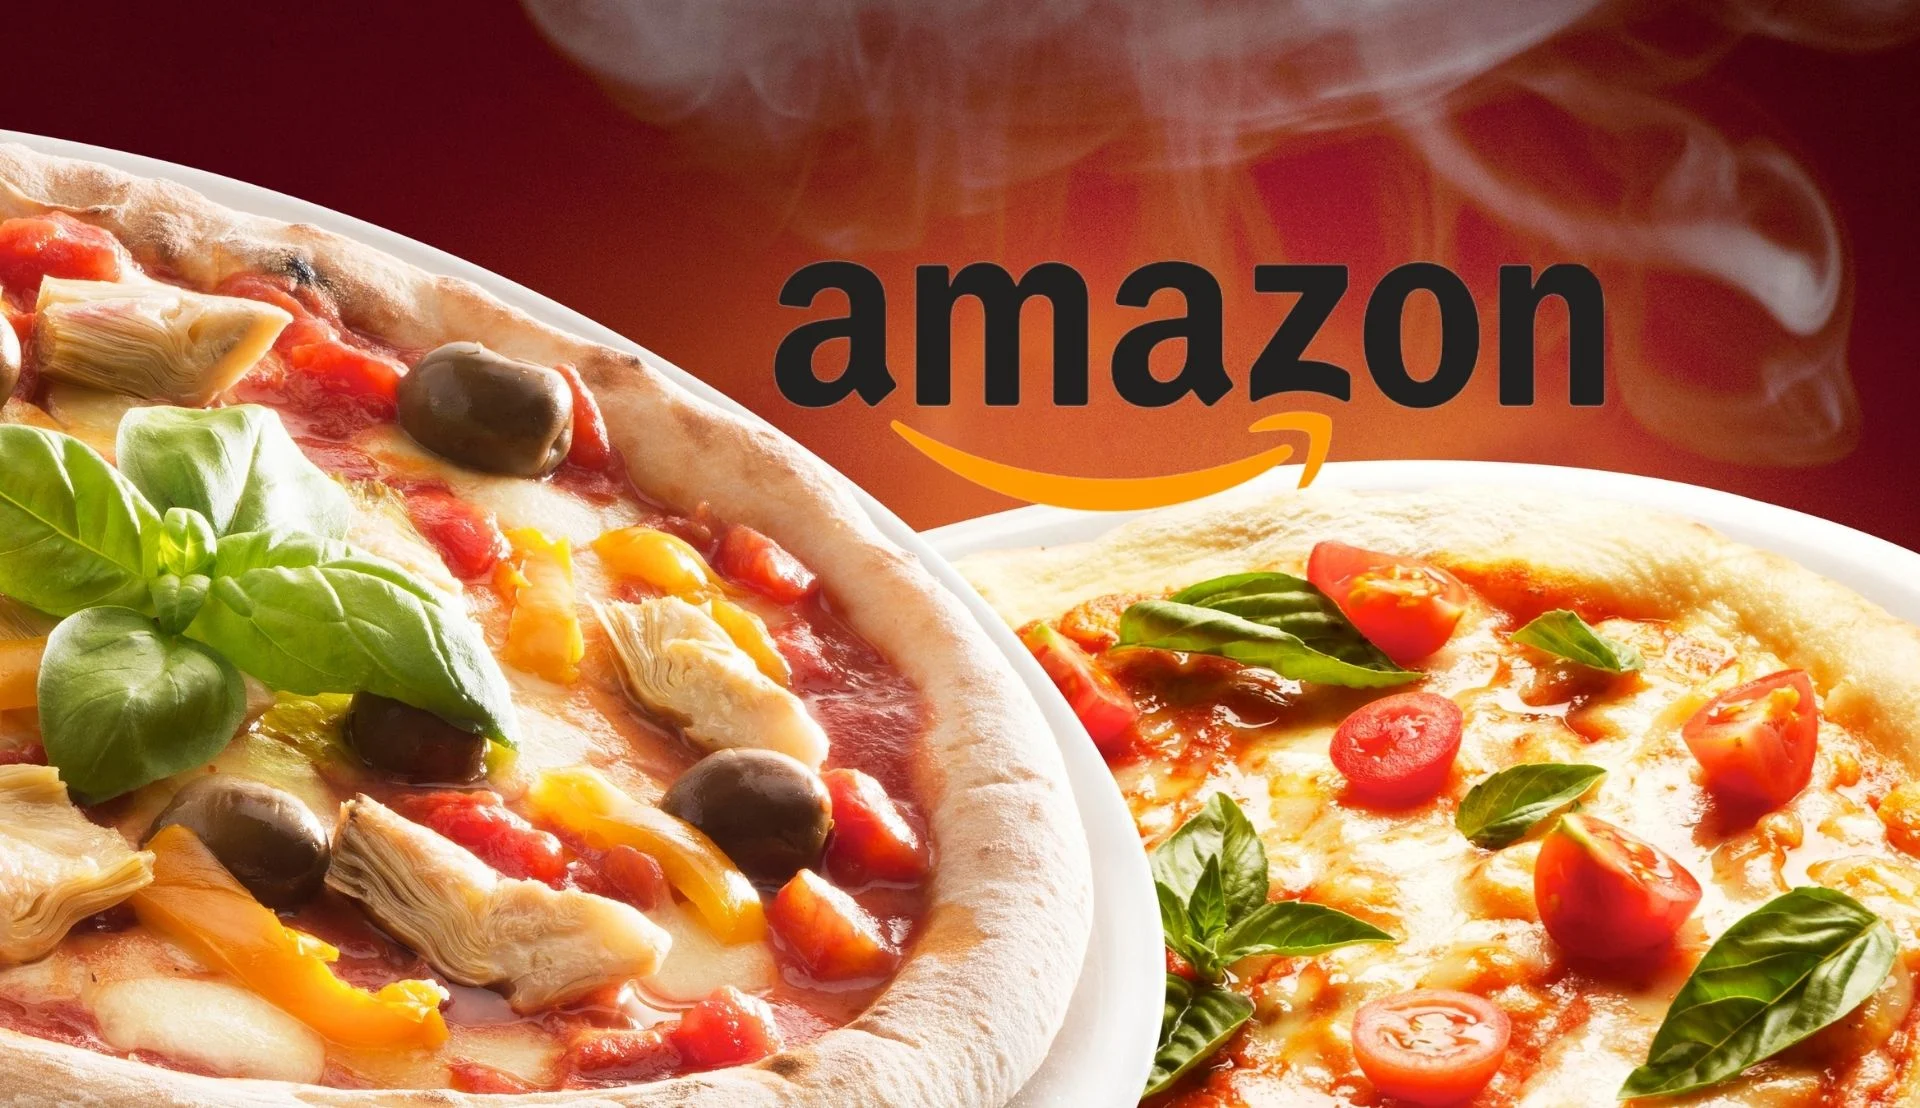 How Pizza Became the Secret Organizational Chart Ingredient Behind Amazon’s Growth